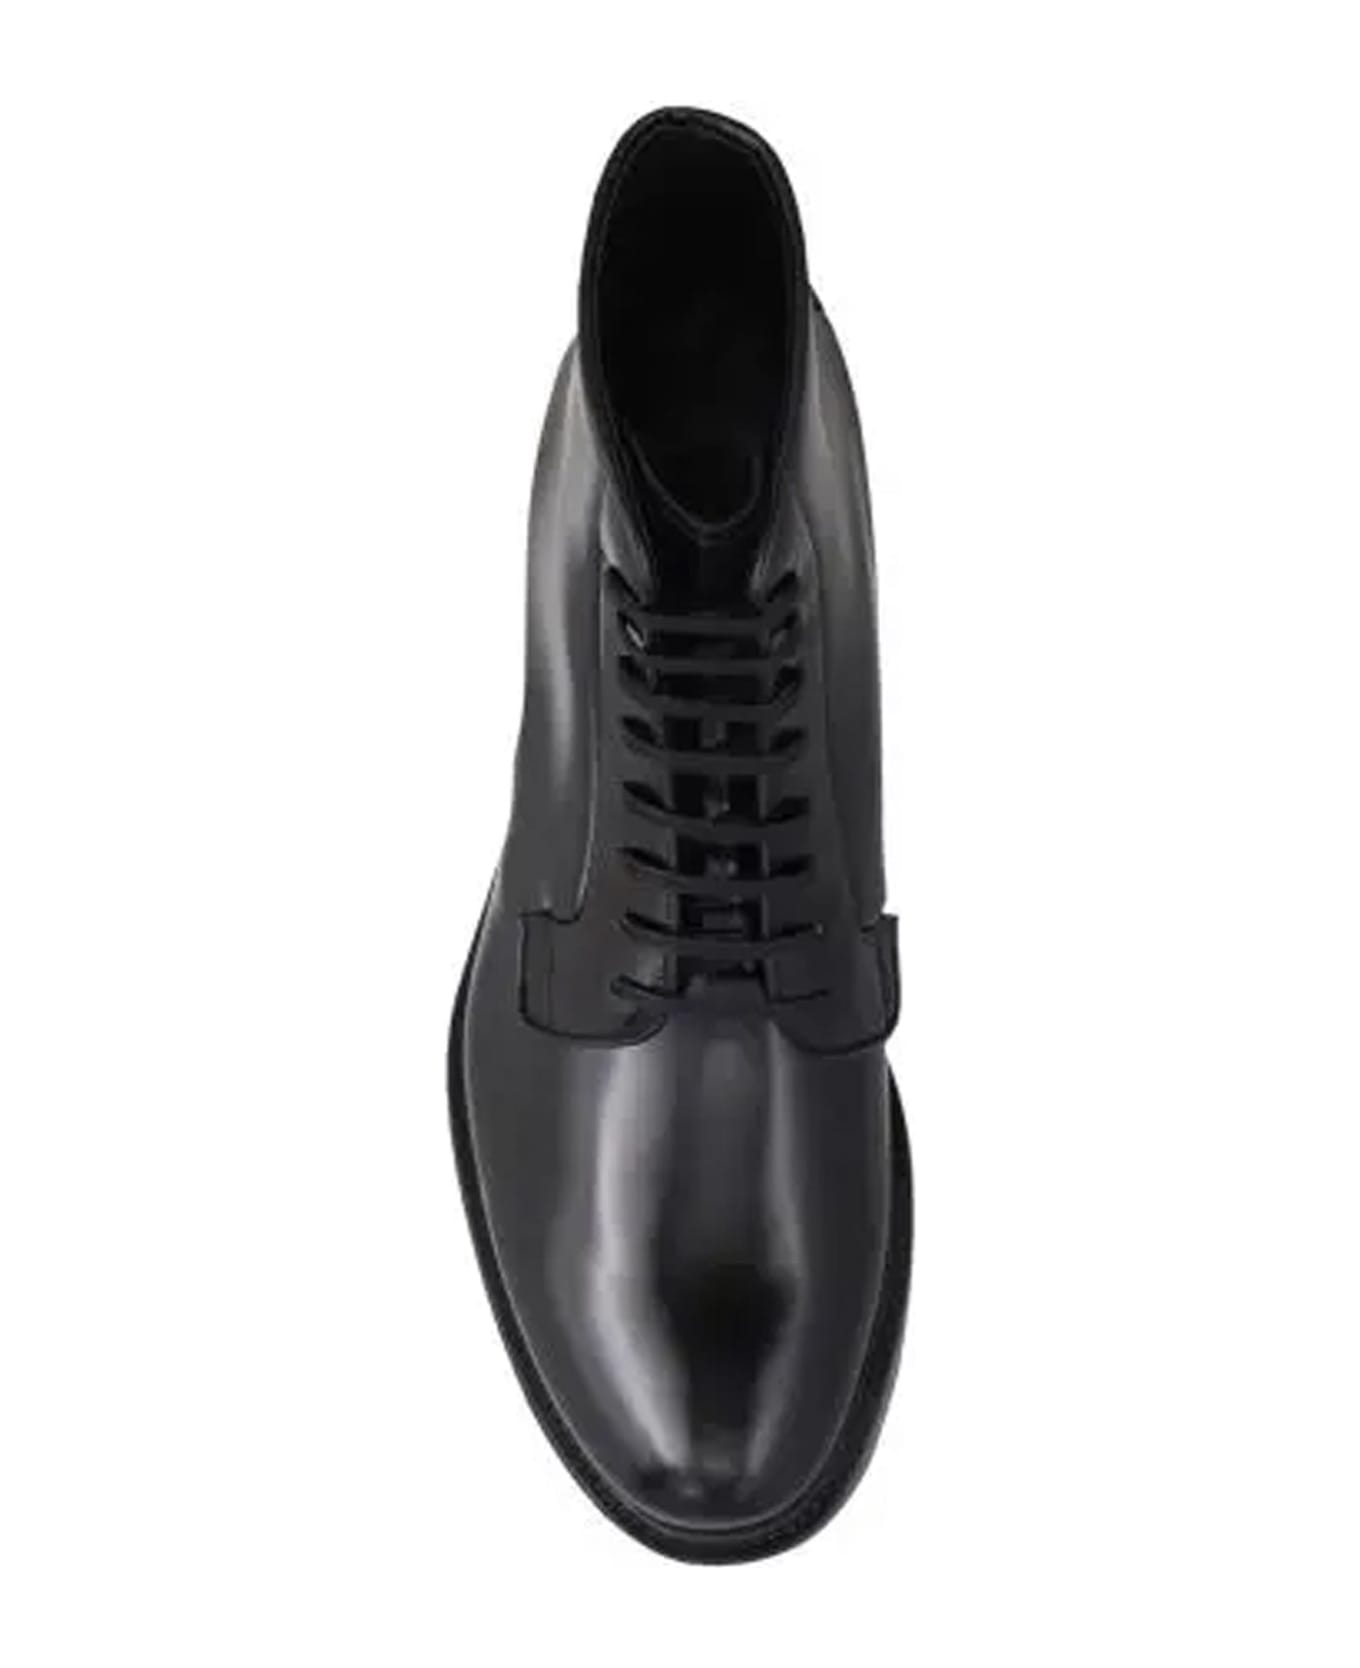 Prada Leather Lace-up Boots - Black